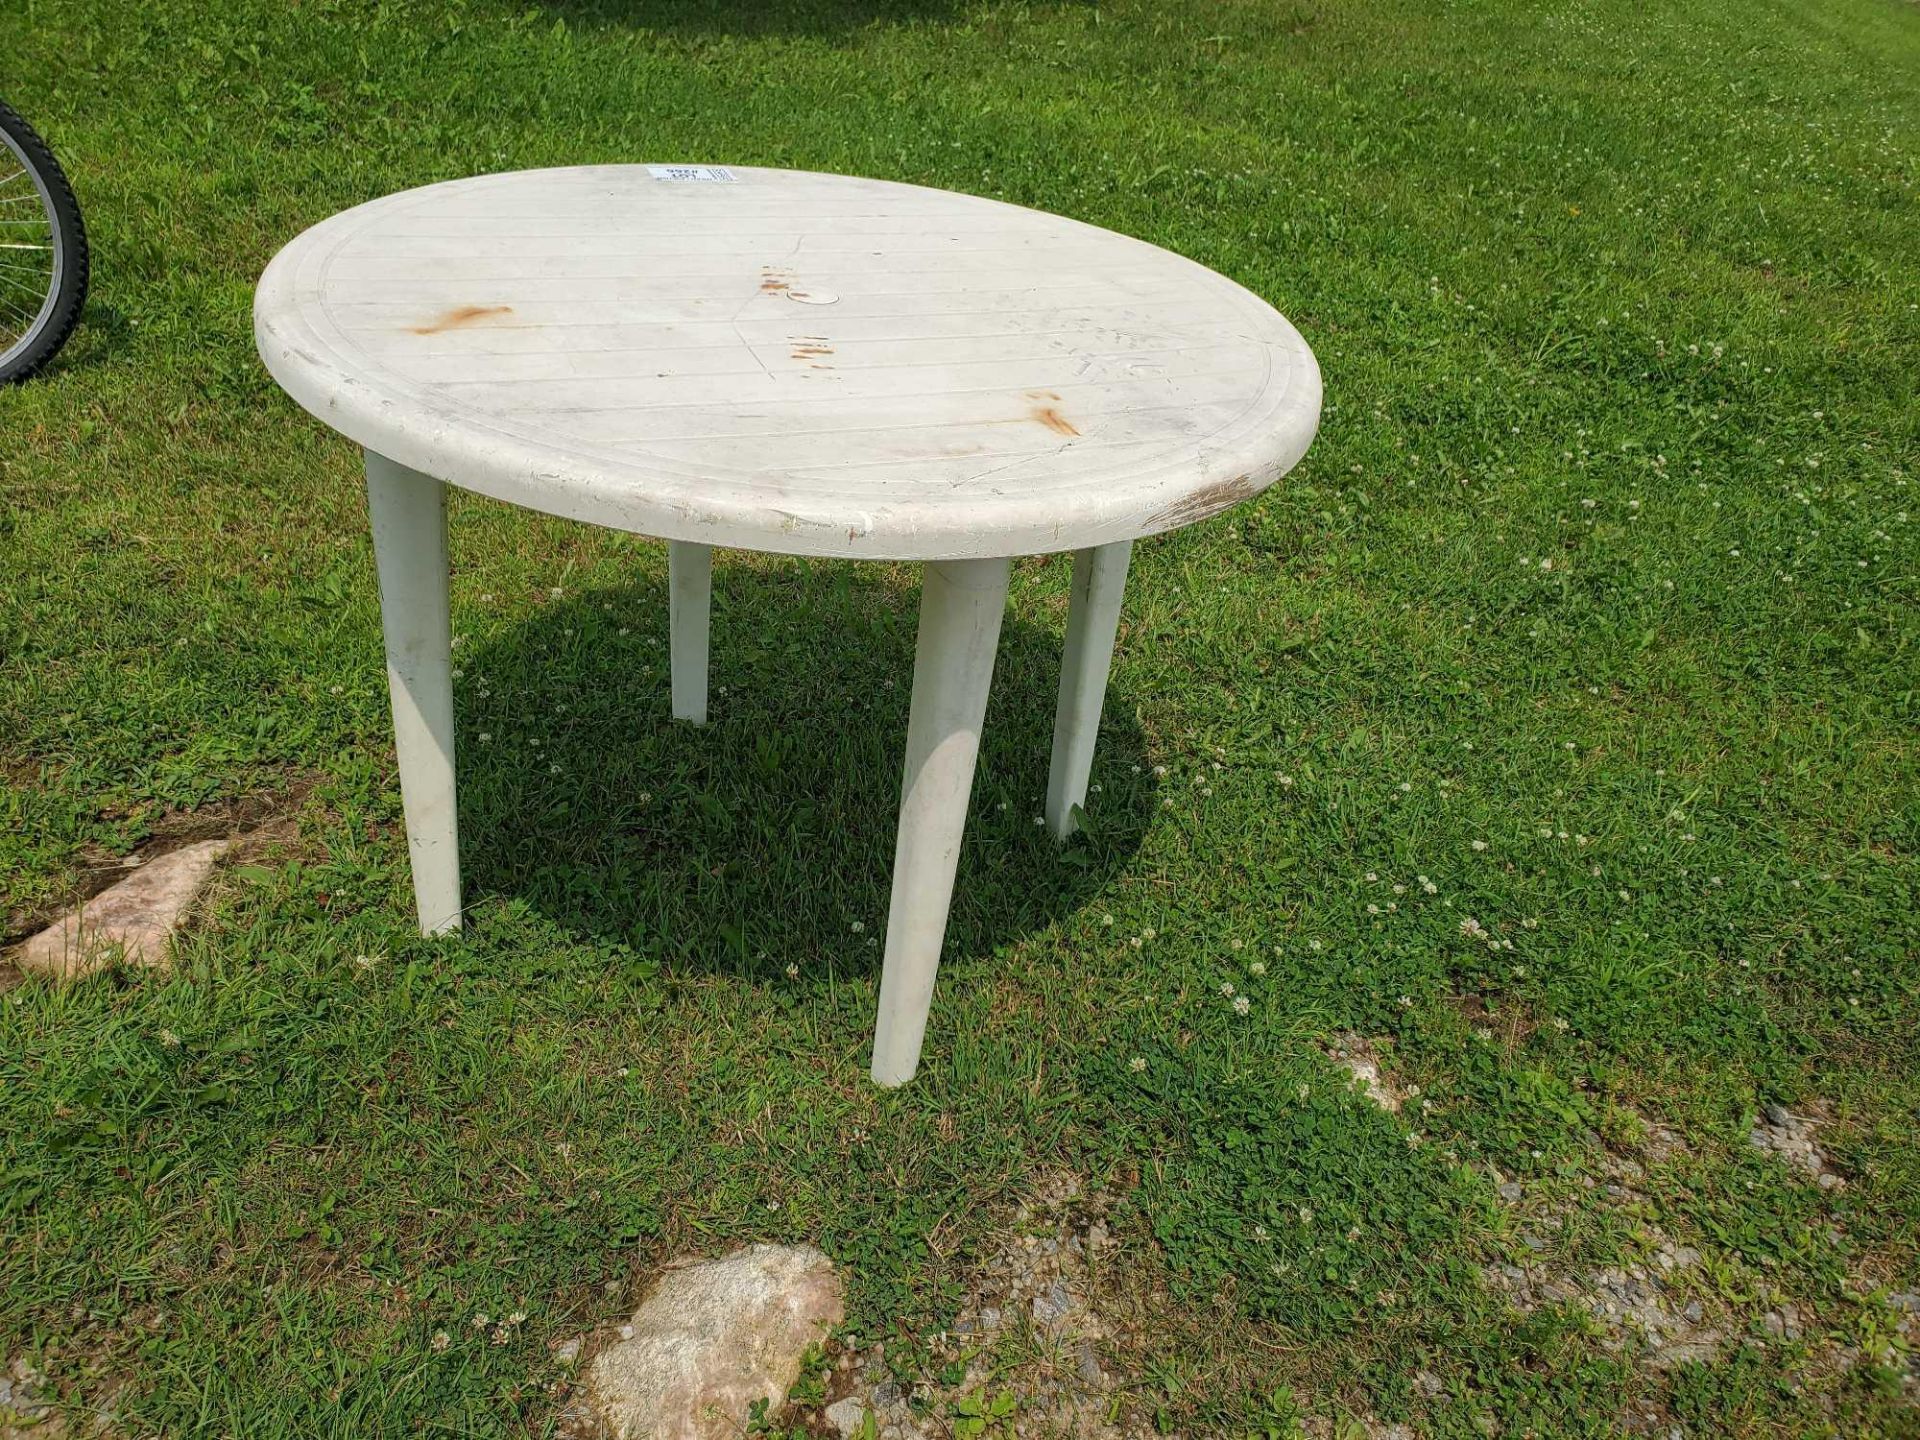 outdoor round table / table ronde d'exterieur - Image 2 of 2